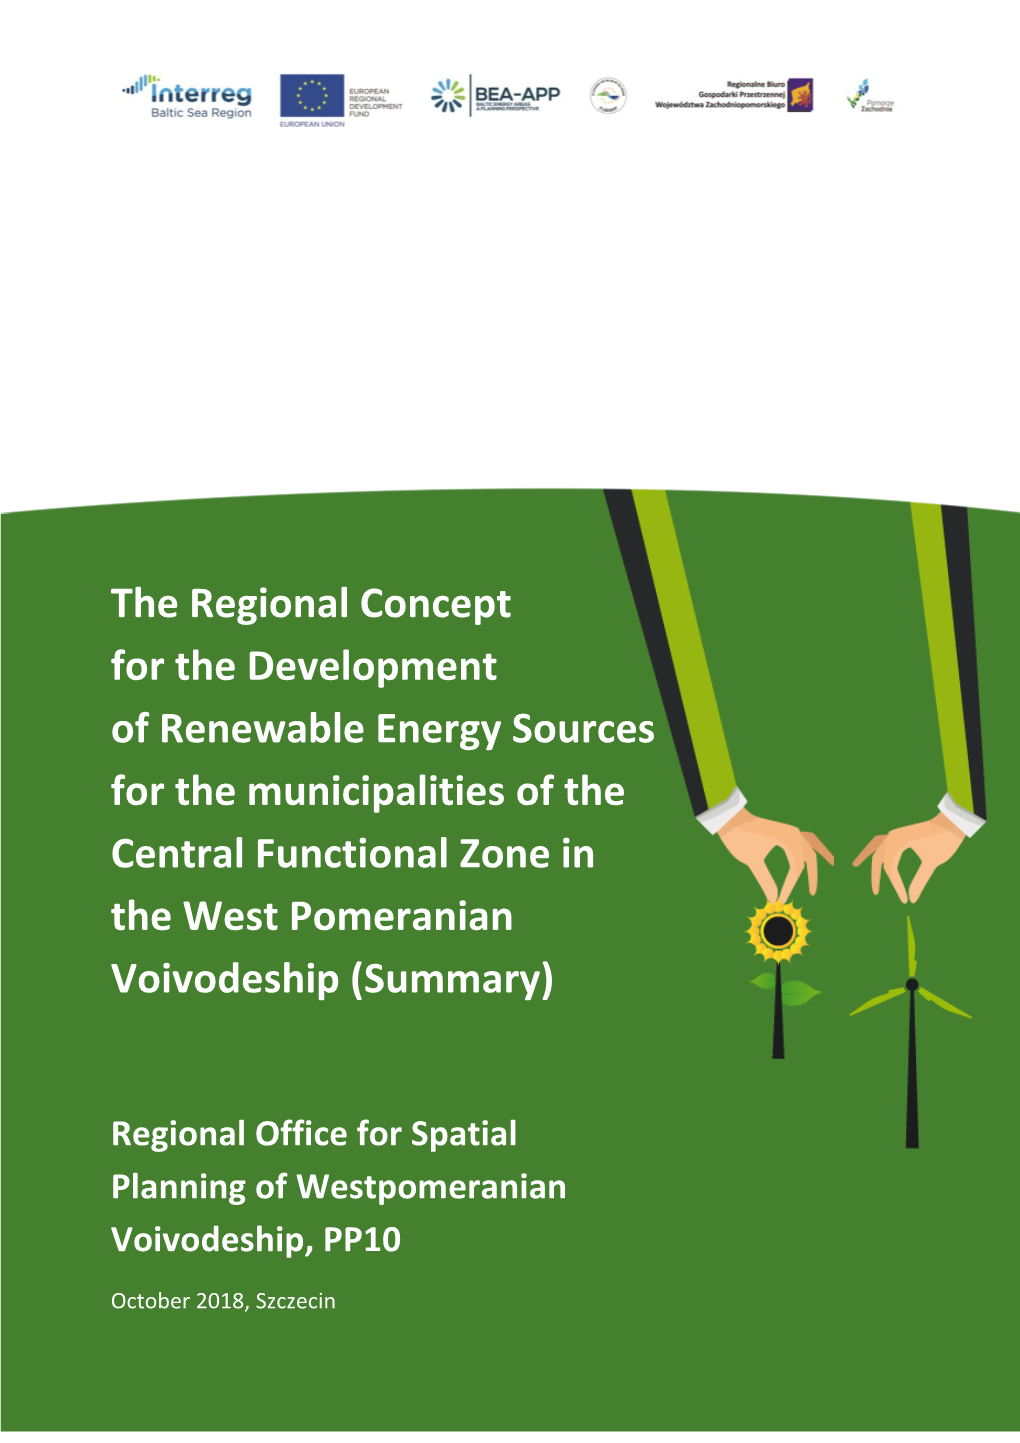 The Regional Concept for the Development of Renewable Energy